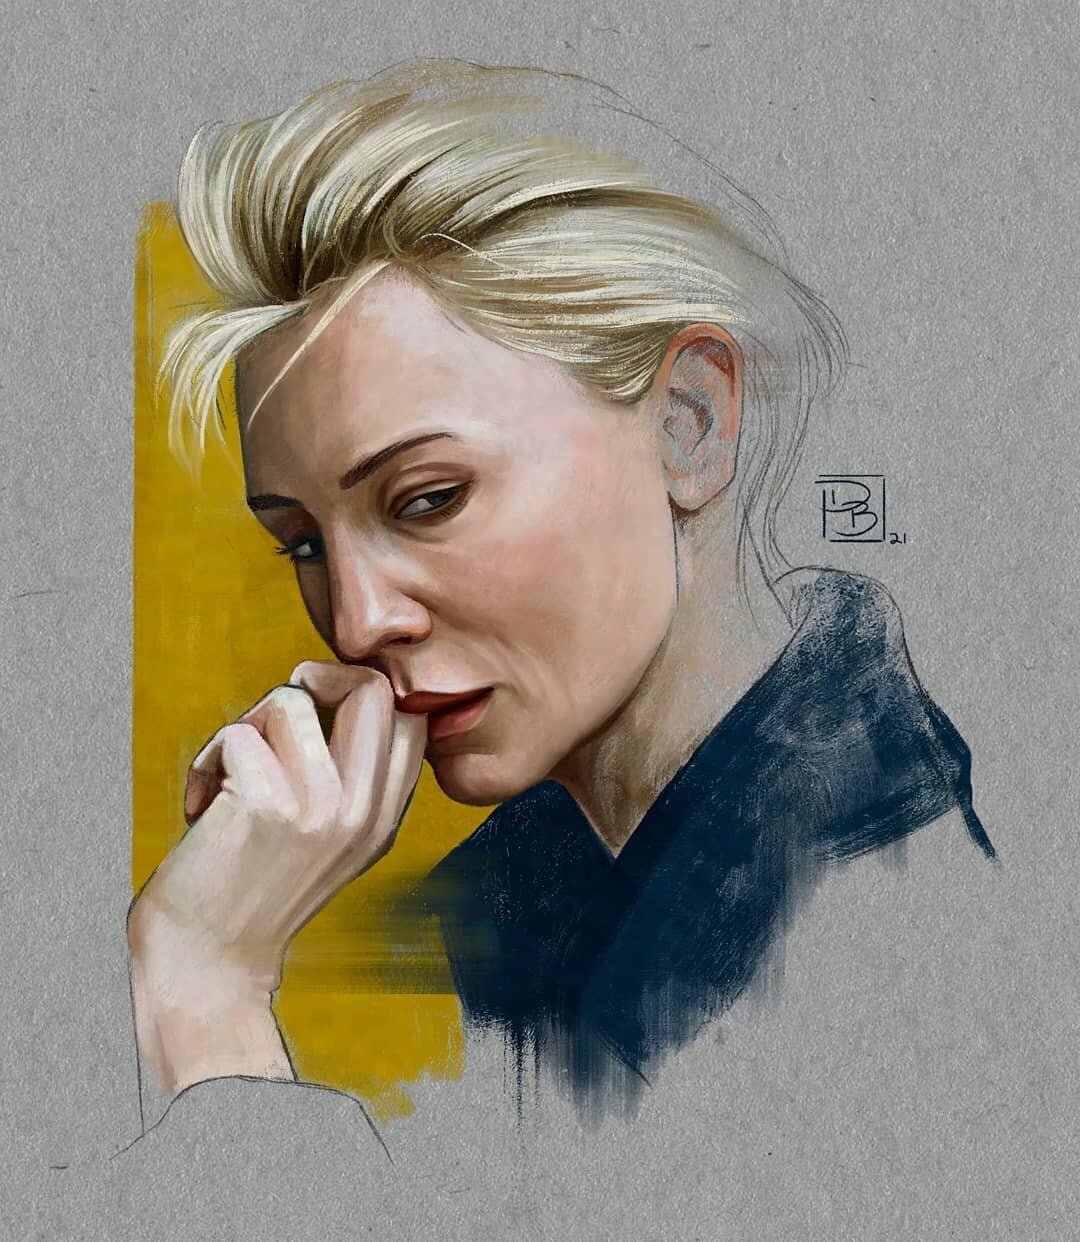 Finished painting study of the lovely Cate Blanchett
..
...
..
..
.
#painting #digitalart #paintingstudy #sketchdaily #portraitstudy #artistofinstagram #cateblanchett #portraitart #digitalpainting #digitalartwork #markmaking #art #portraitpainting #a